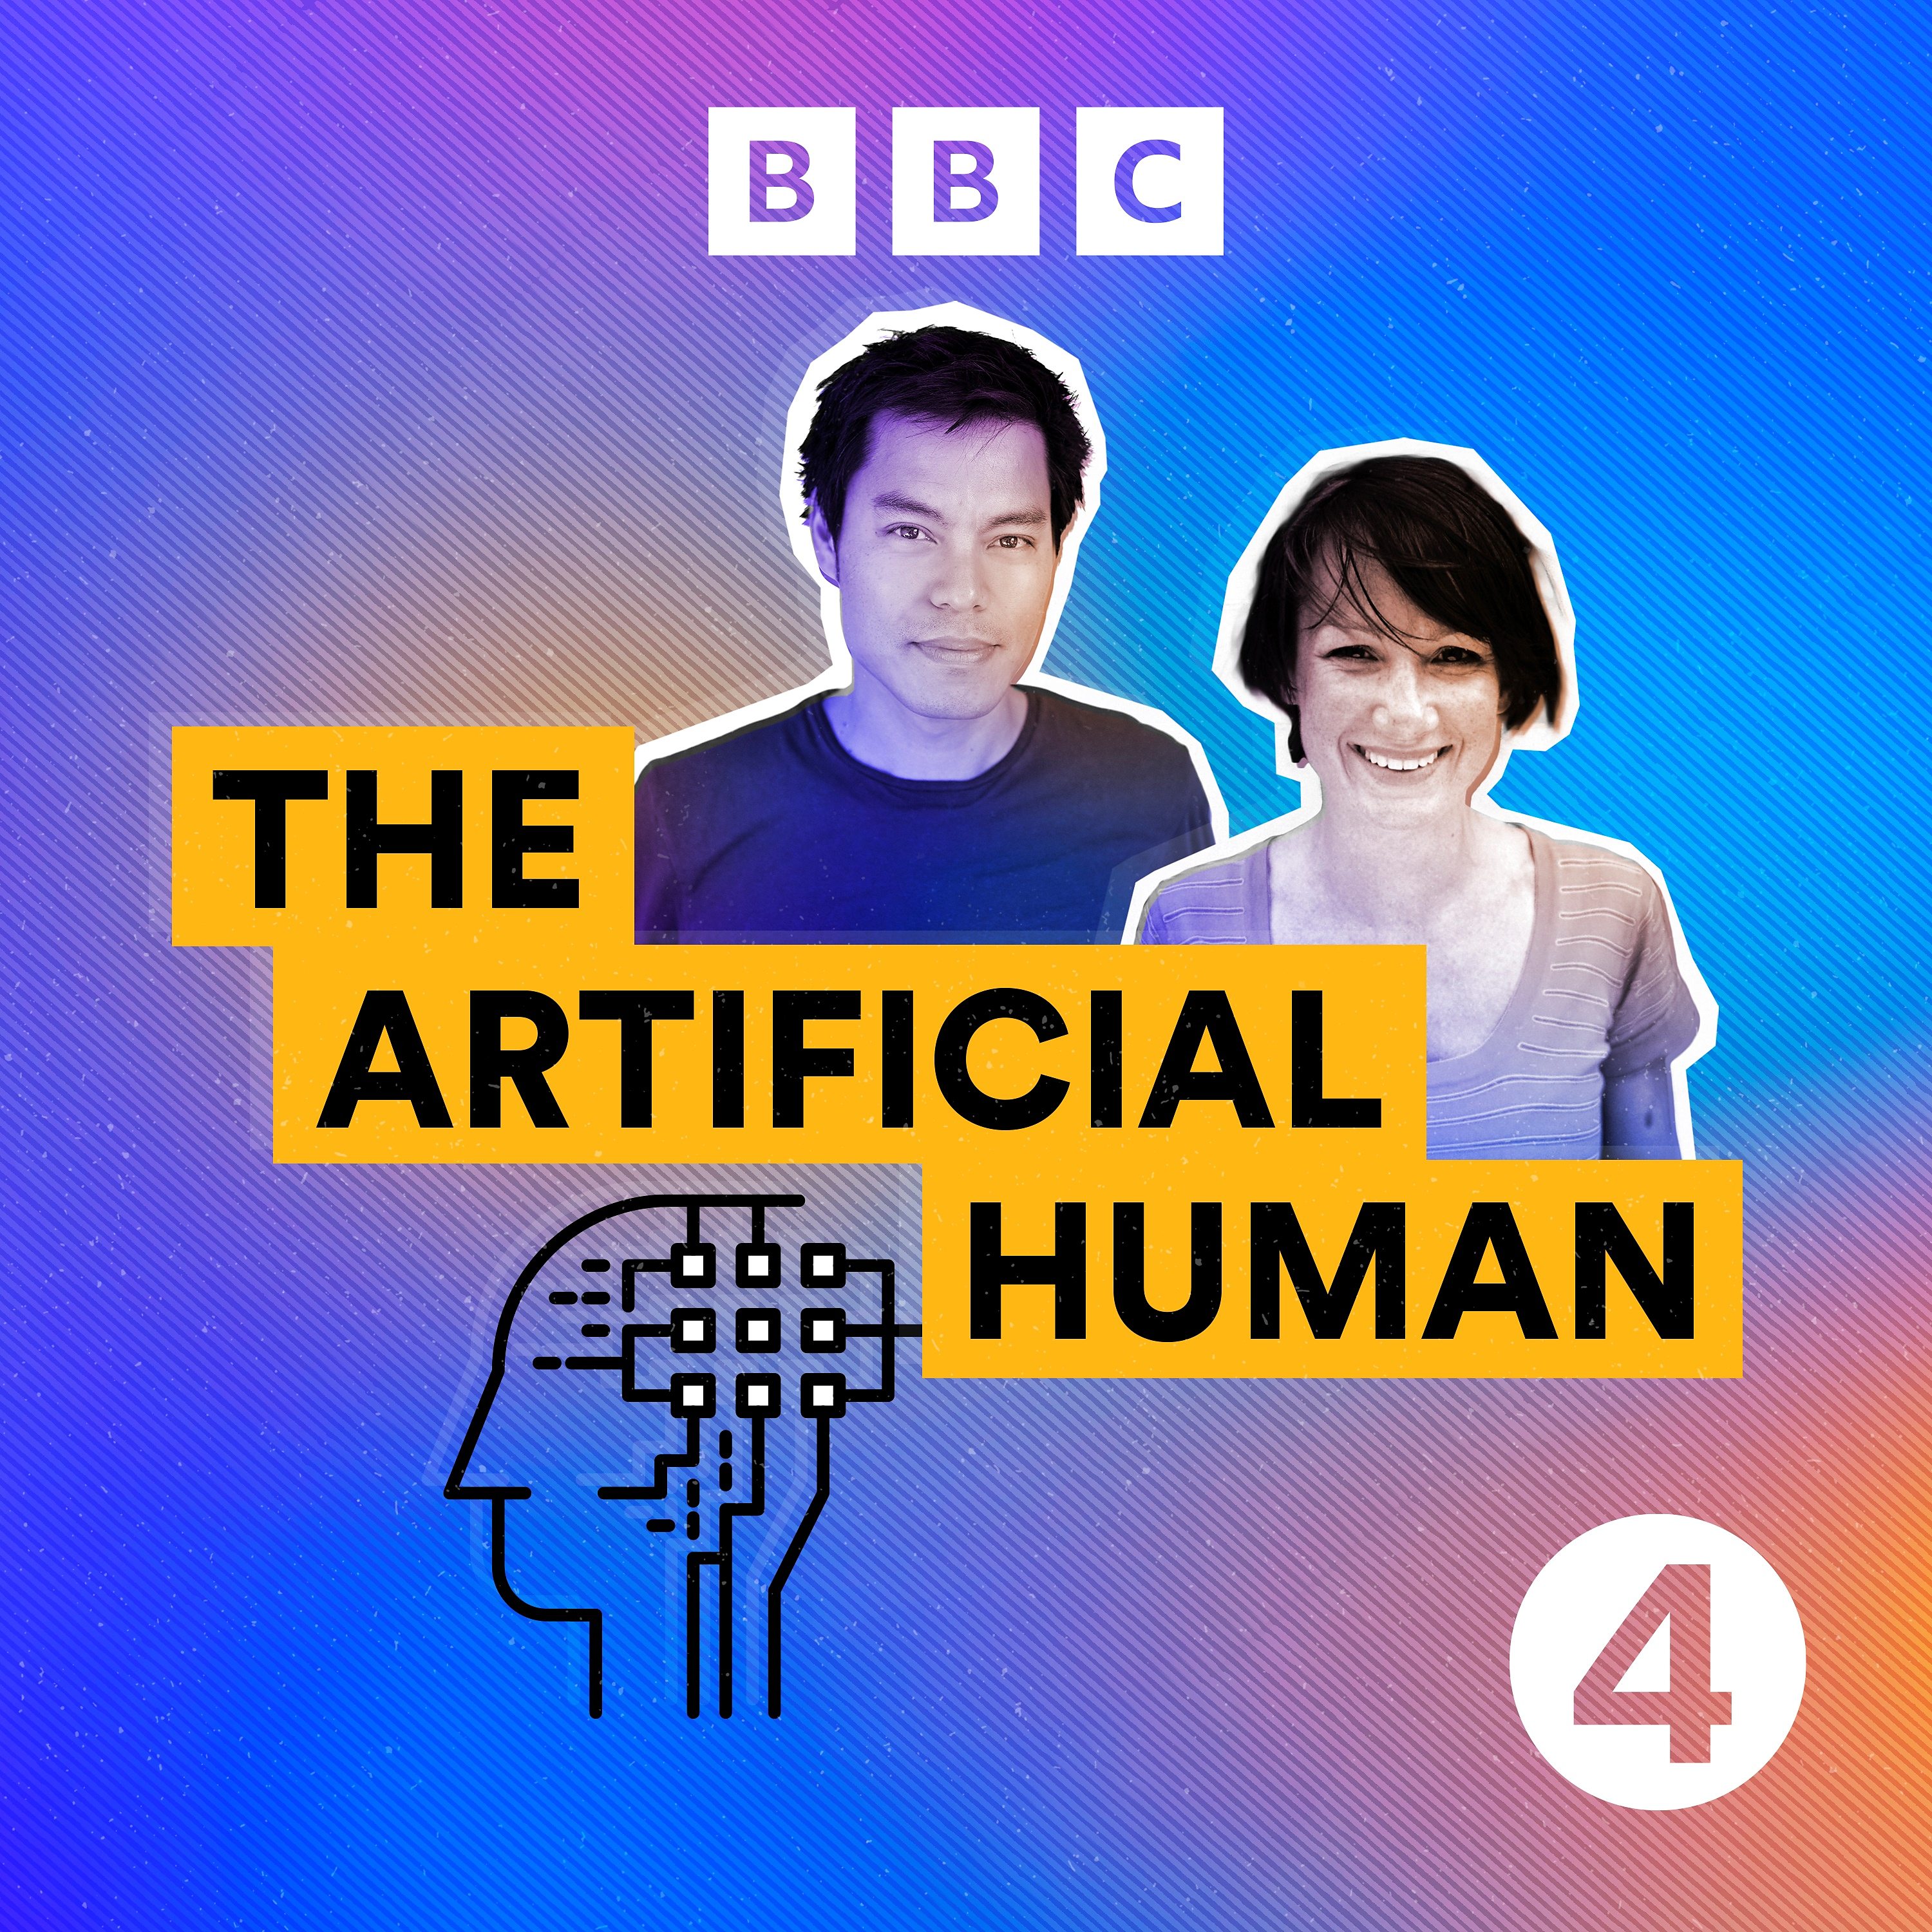 The Artificial Human Image